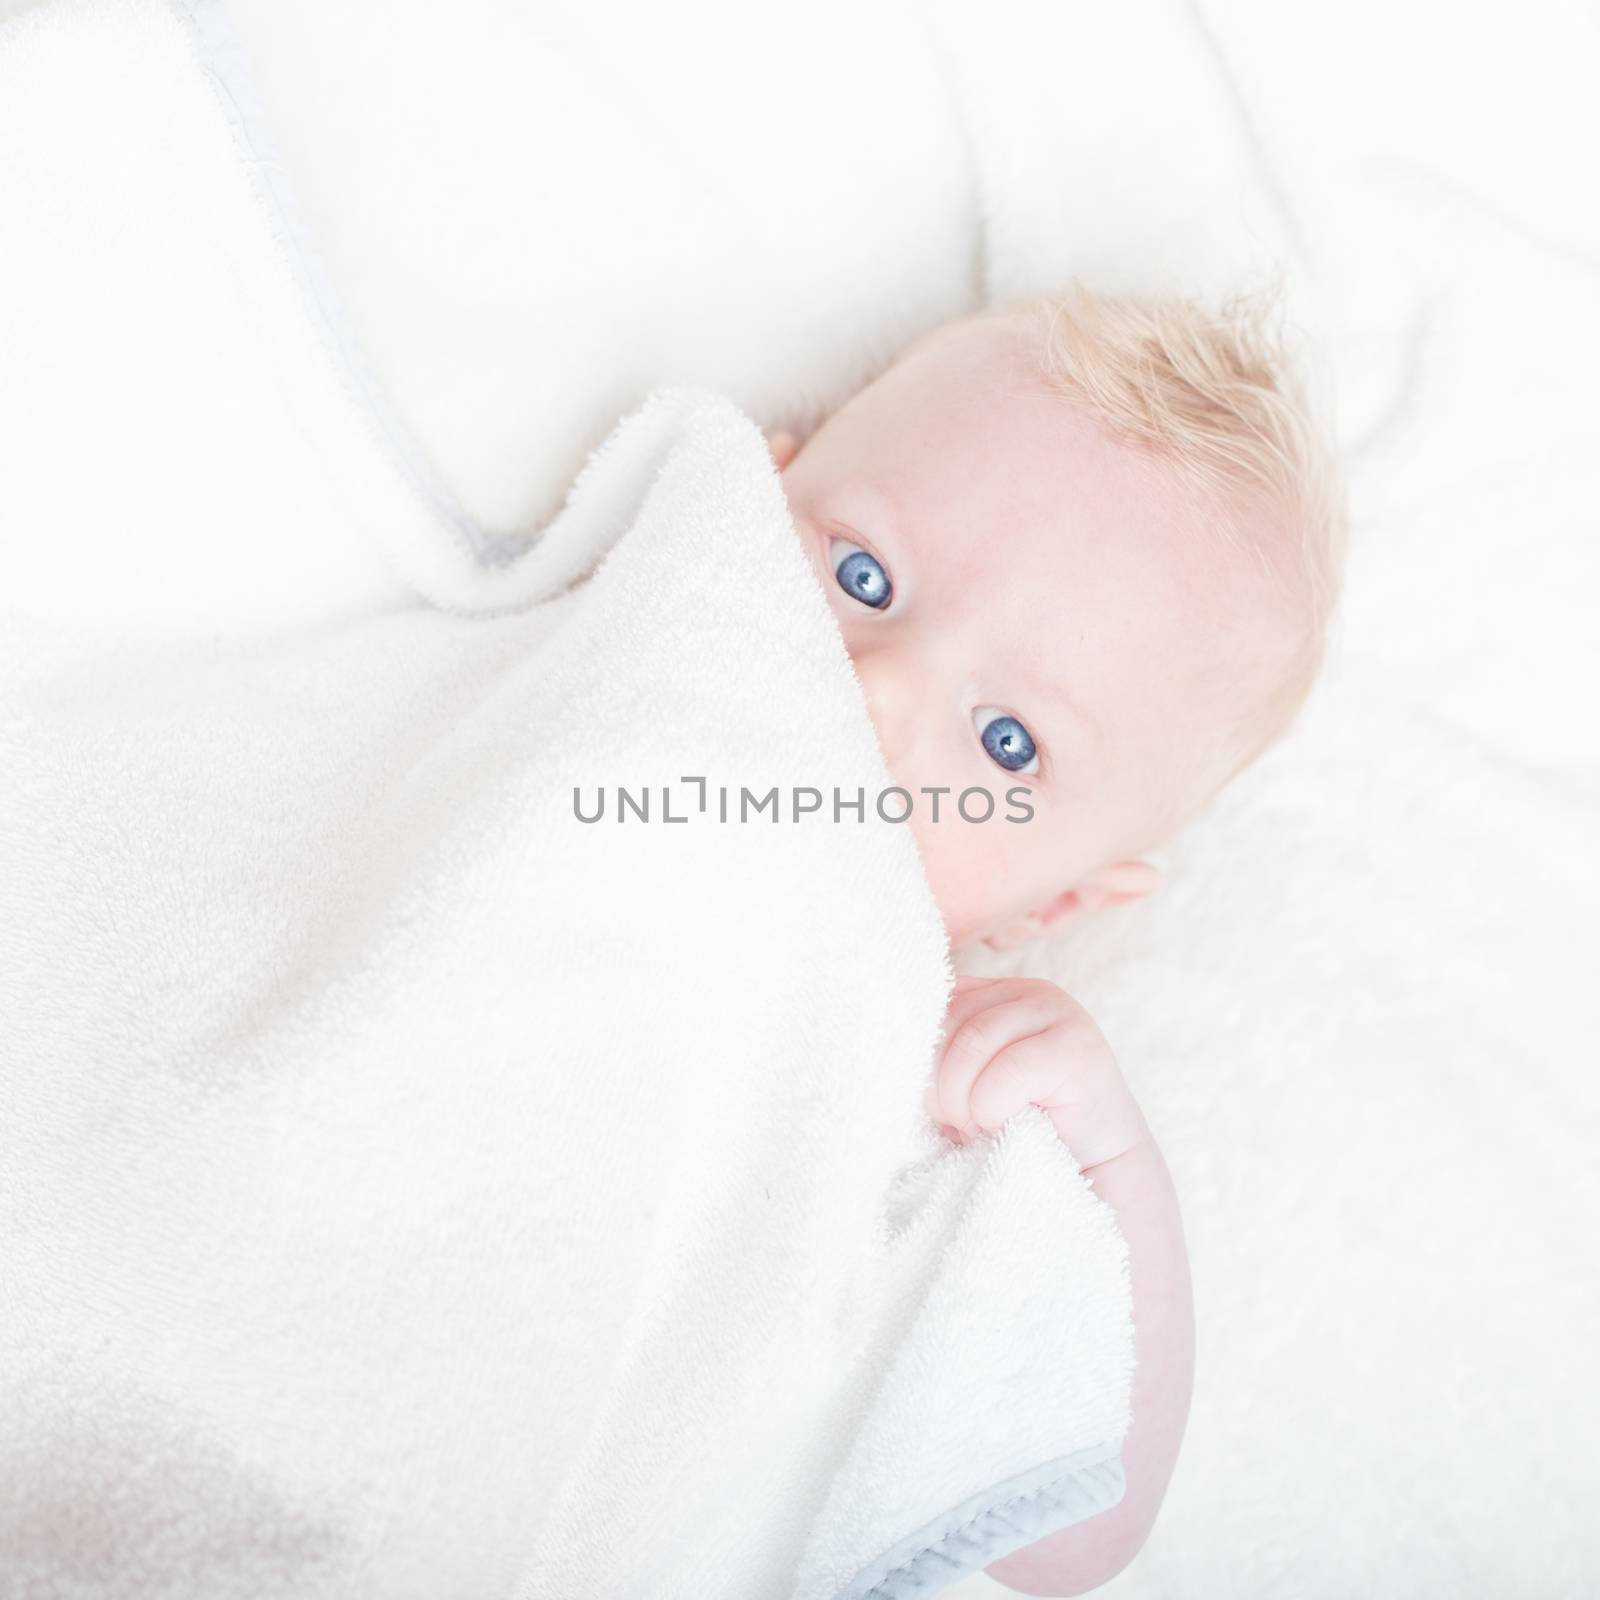 Cute blonde little baby boy with blue eyes hiding under the blanket.